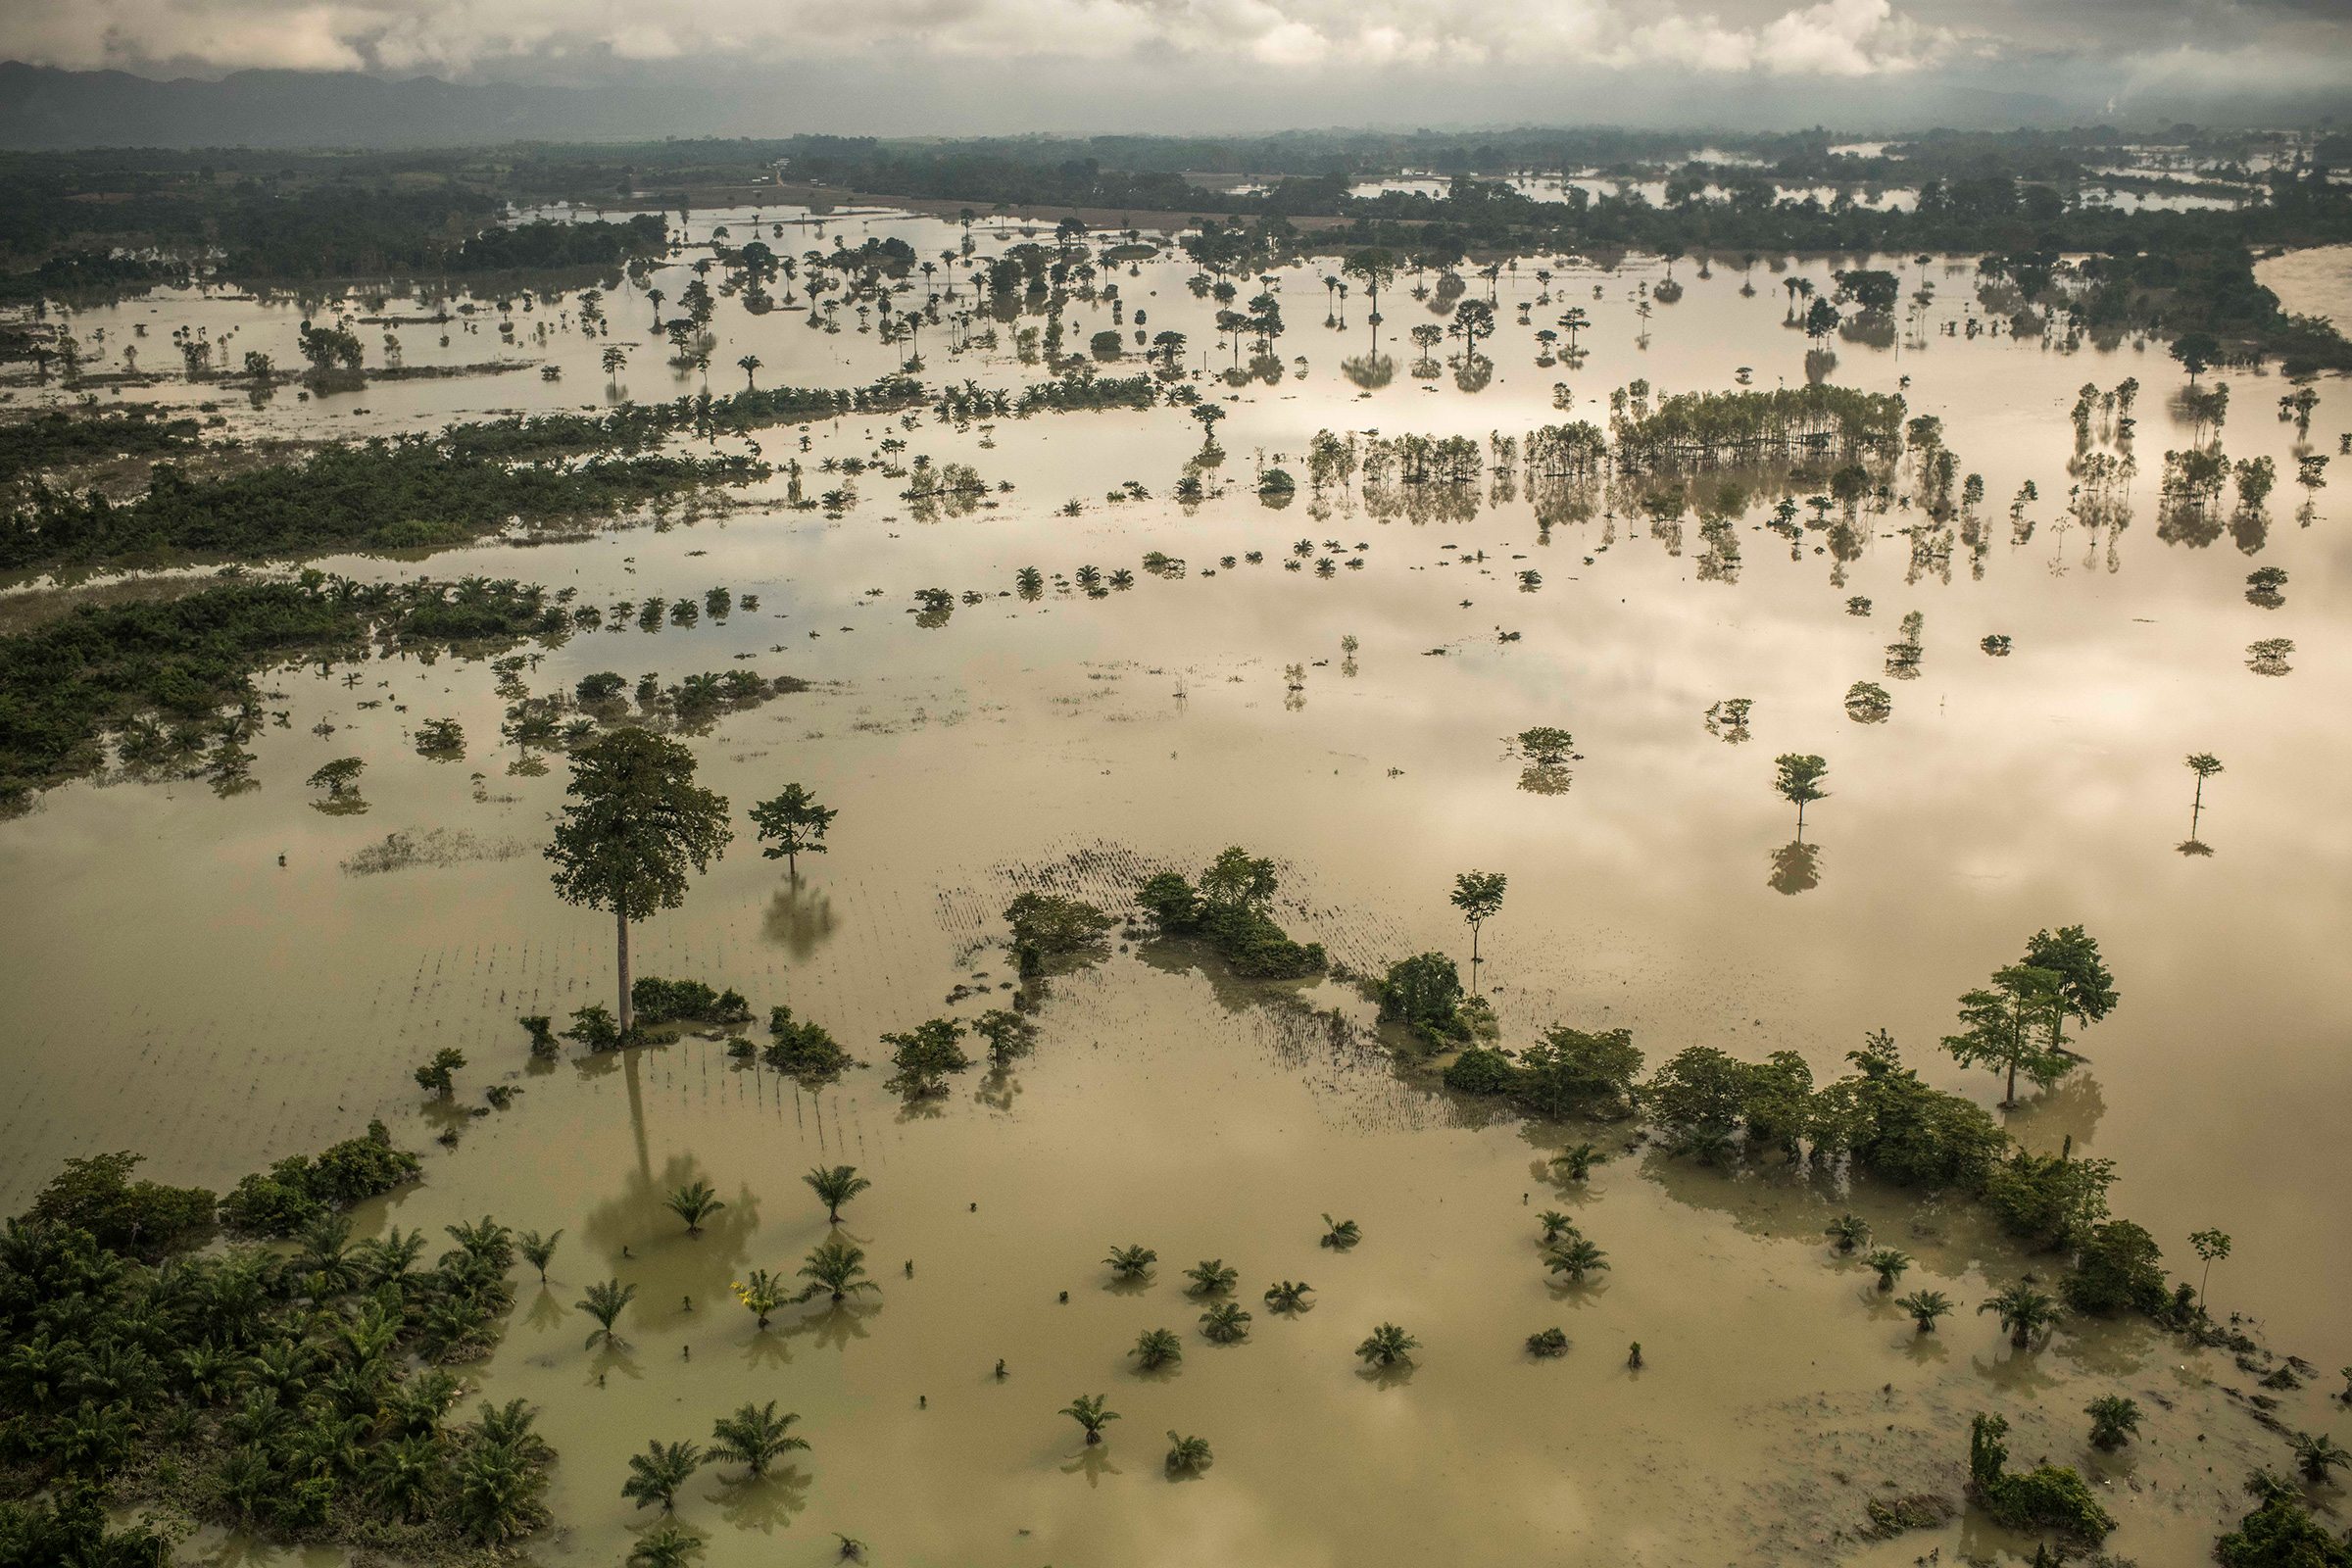 A view of the vast flooding in Guatemala, after Hurricanes Eta and Iota struck one after the other, on Nov. 26, 2020. (Daniele Volpe—The New York Times/Redux)